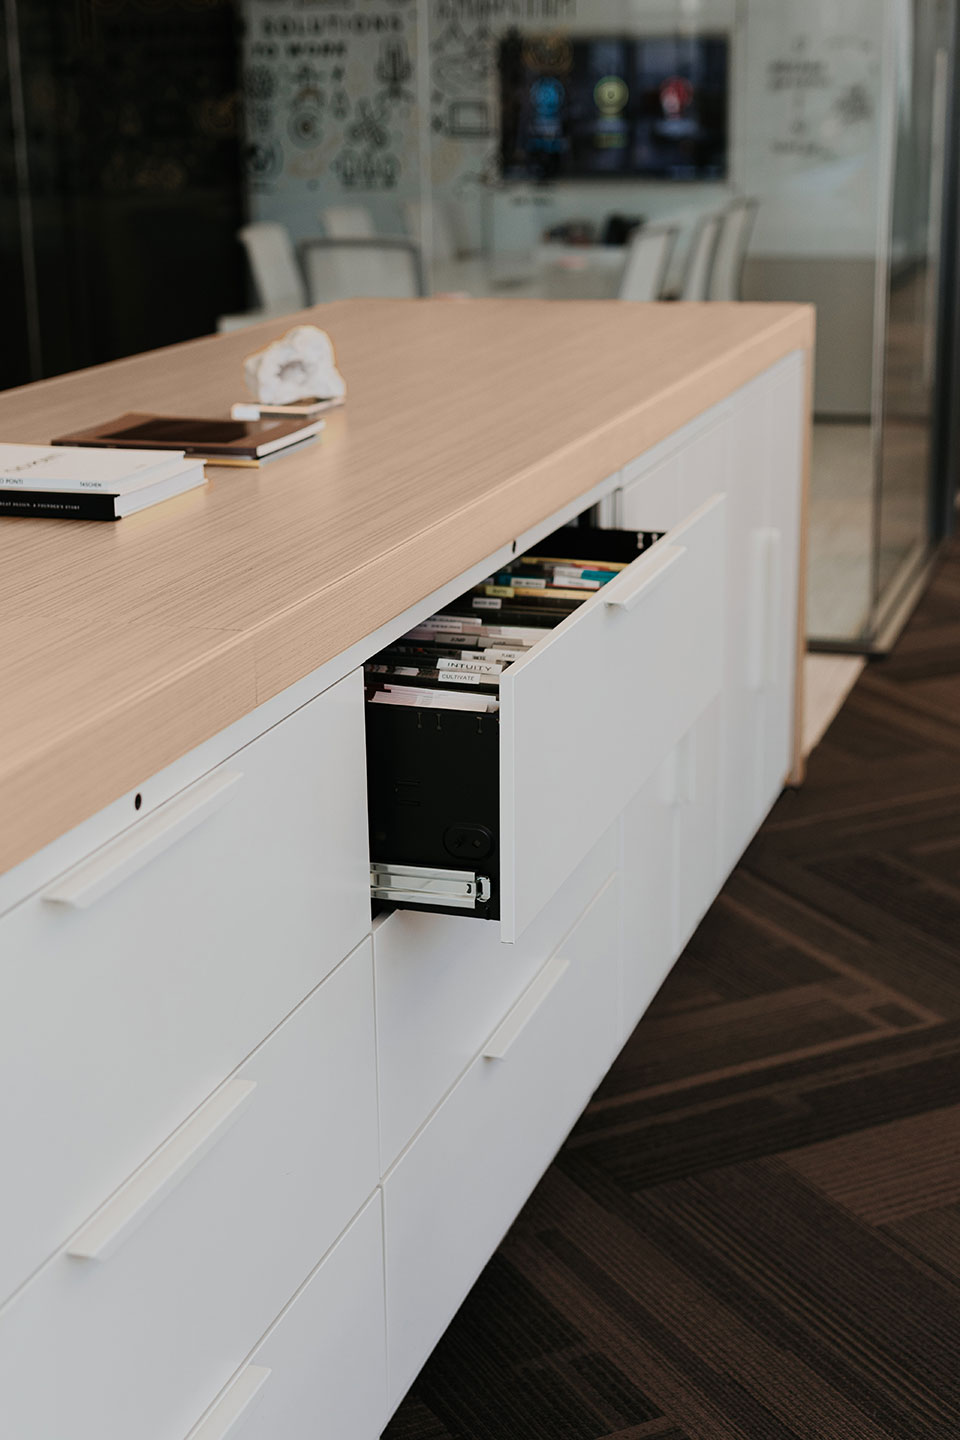 Haworth Patterns Architectural Workspace in office space with a veneer top and white drawers with a open drawer with files